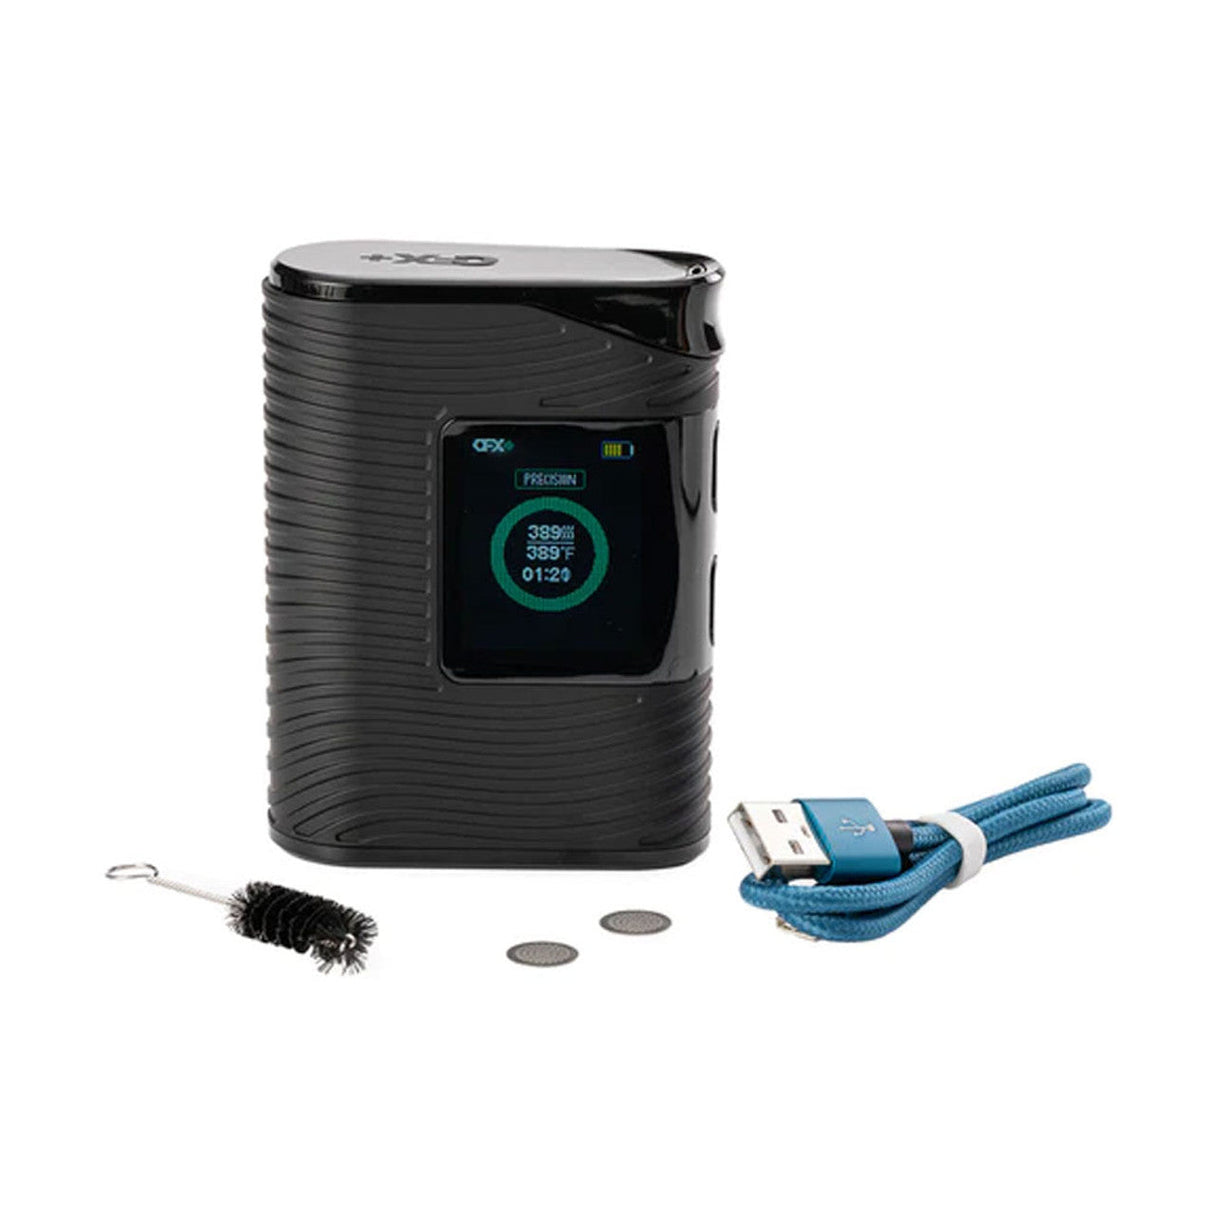 Boundless CFX+ Vaporizer with digital display, cleaning brush, and USB cable